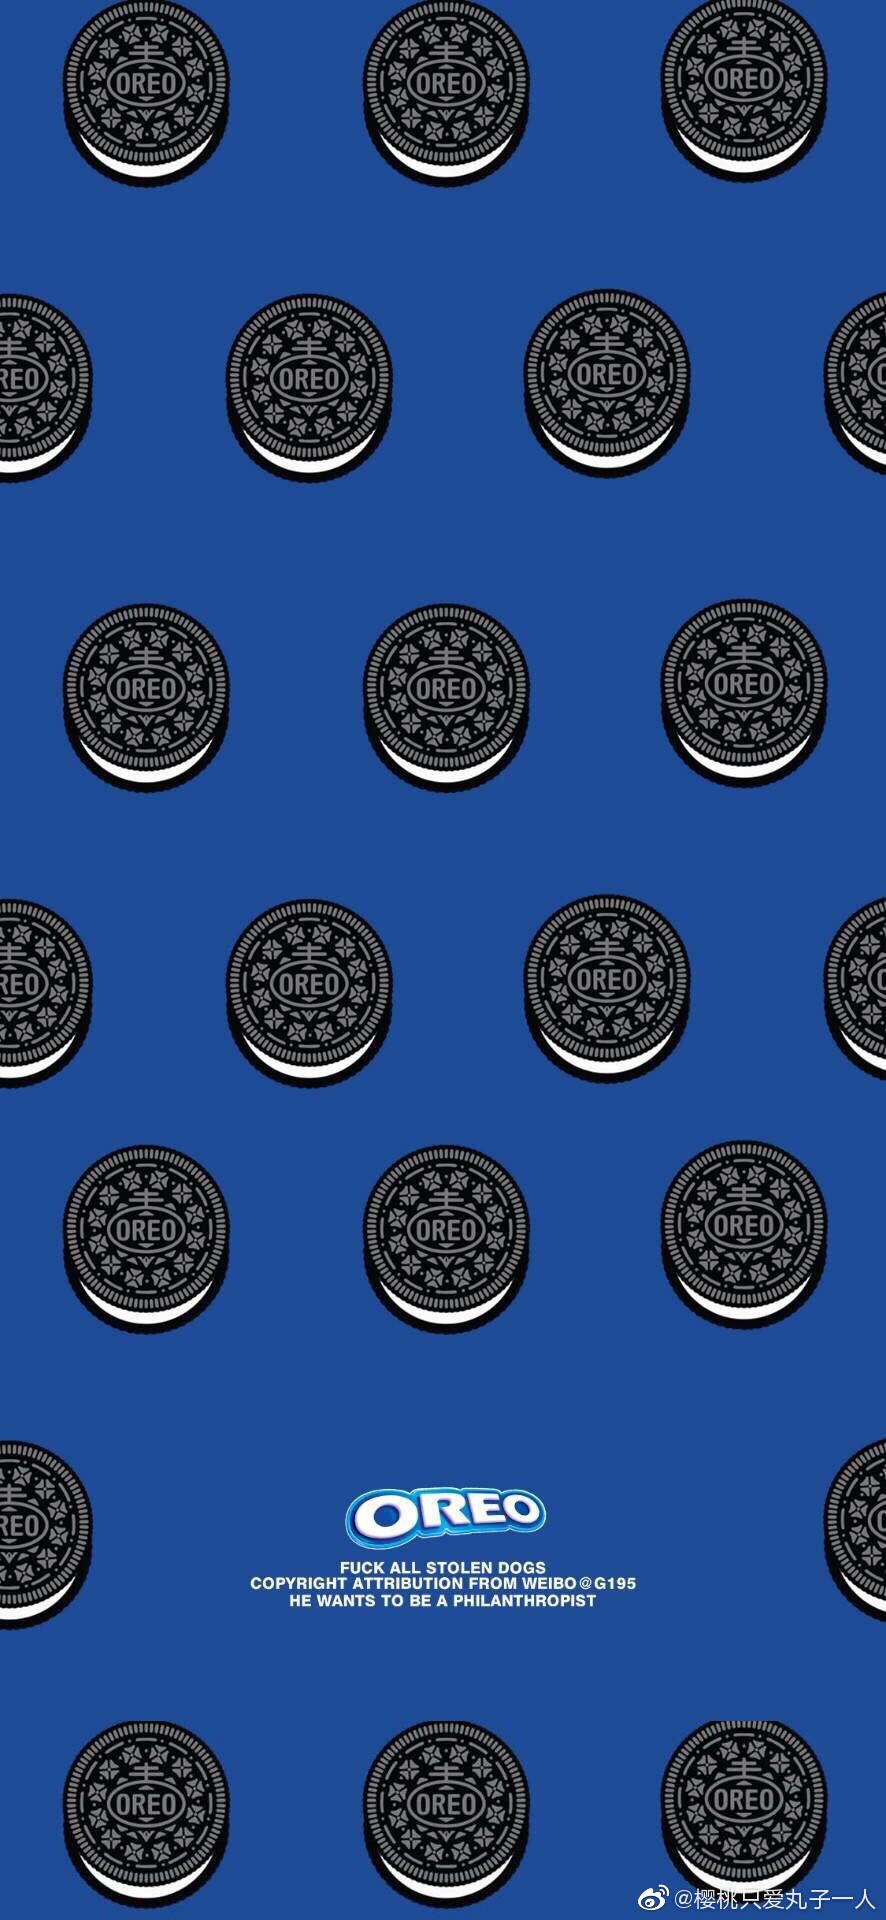 A blue background with many black circles - Oreo